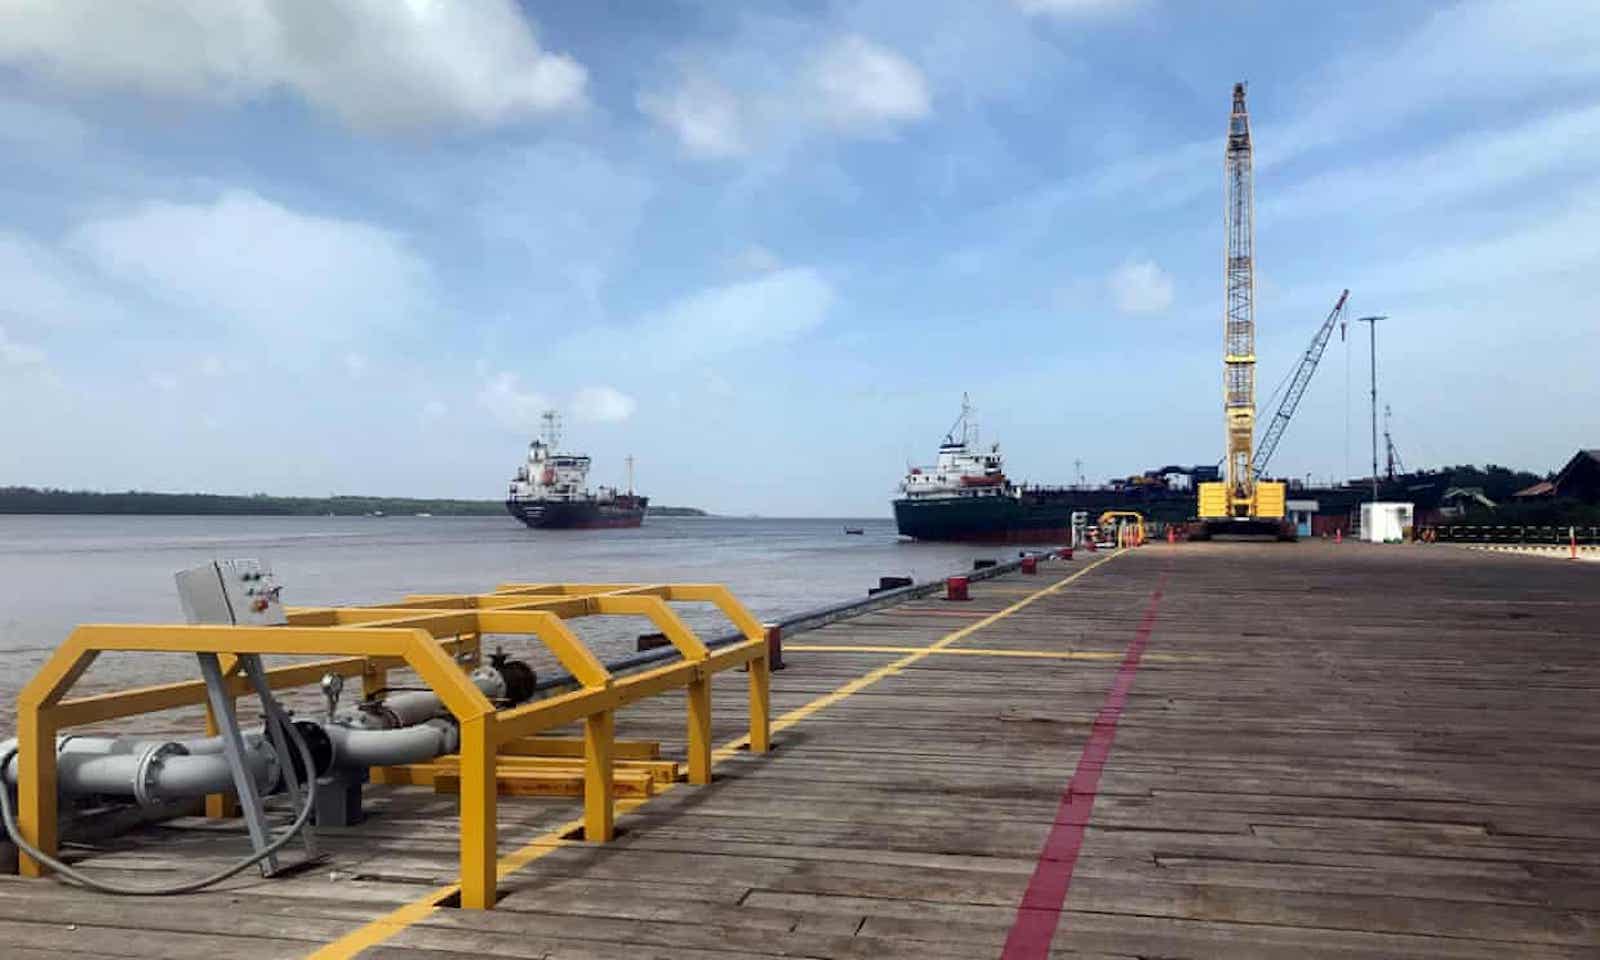 Vessels carrying supplies for an offshore oil platform operated by ExxonMobil at a wharf on the Demerara River, south of Georgetown.